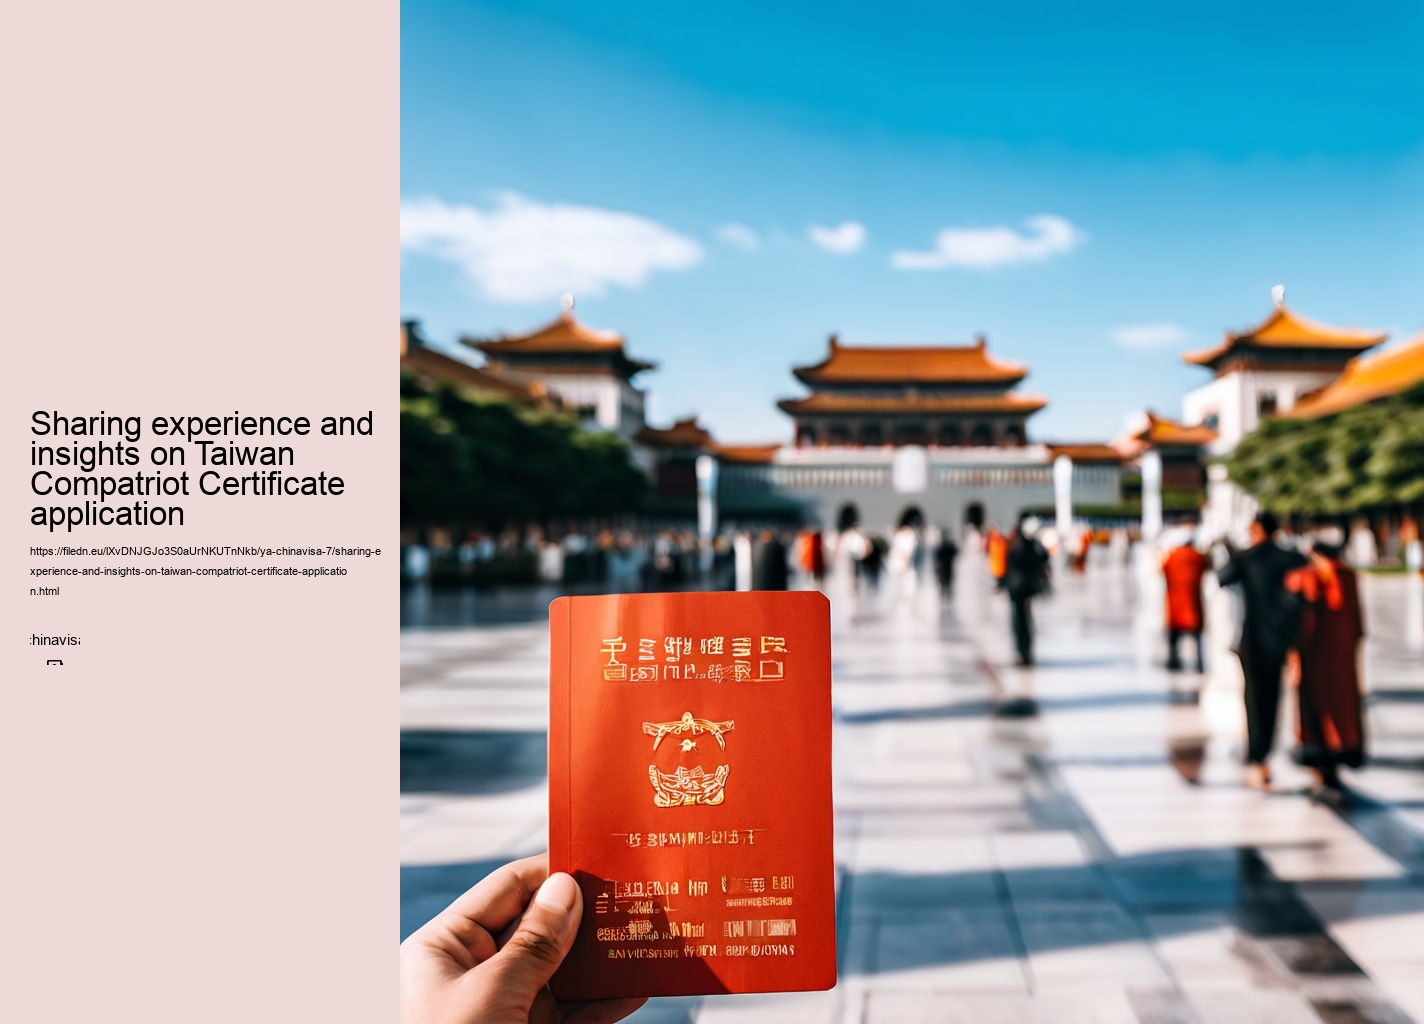 Sharing experience and insights on Taiwan Compatriot Certificate application